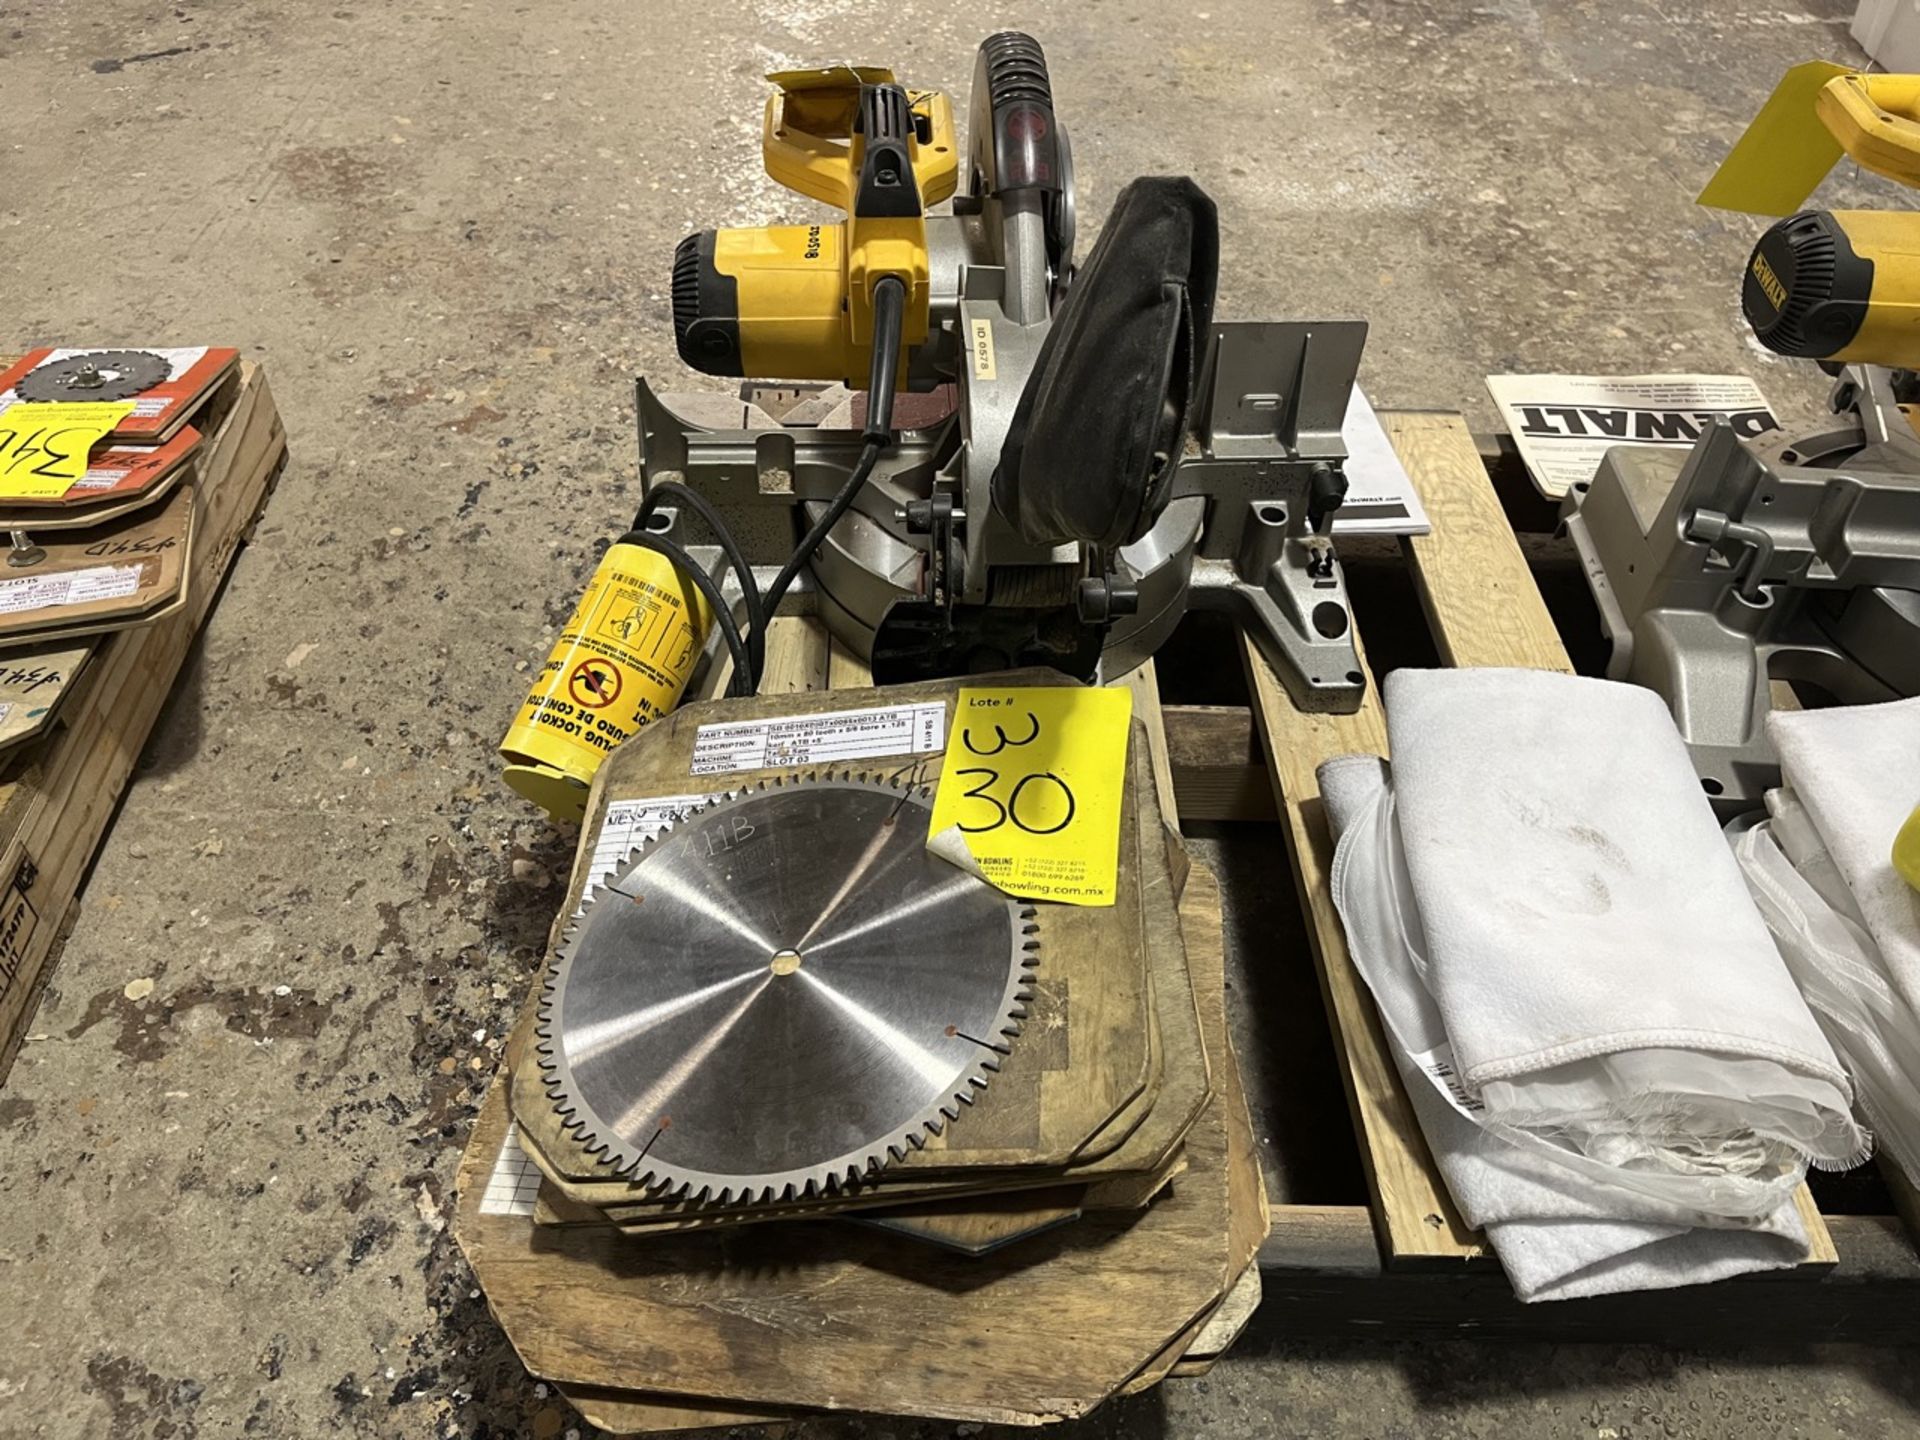 DEWALT 12" Miter Saw, Model DWS780, Serial No. SS, 120V, Includes 5 different sized blades and dust